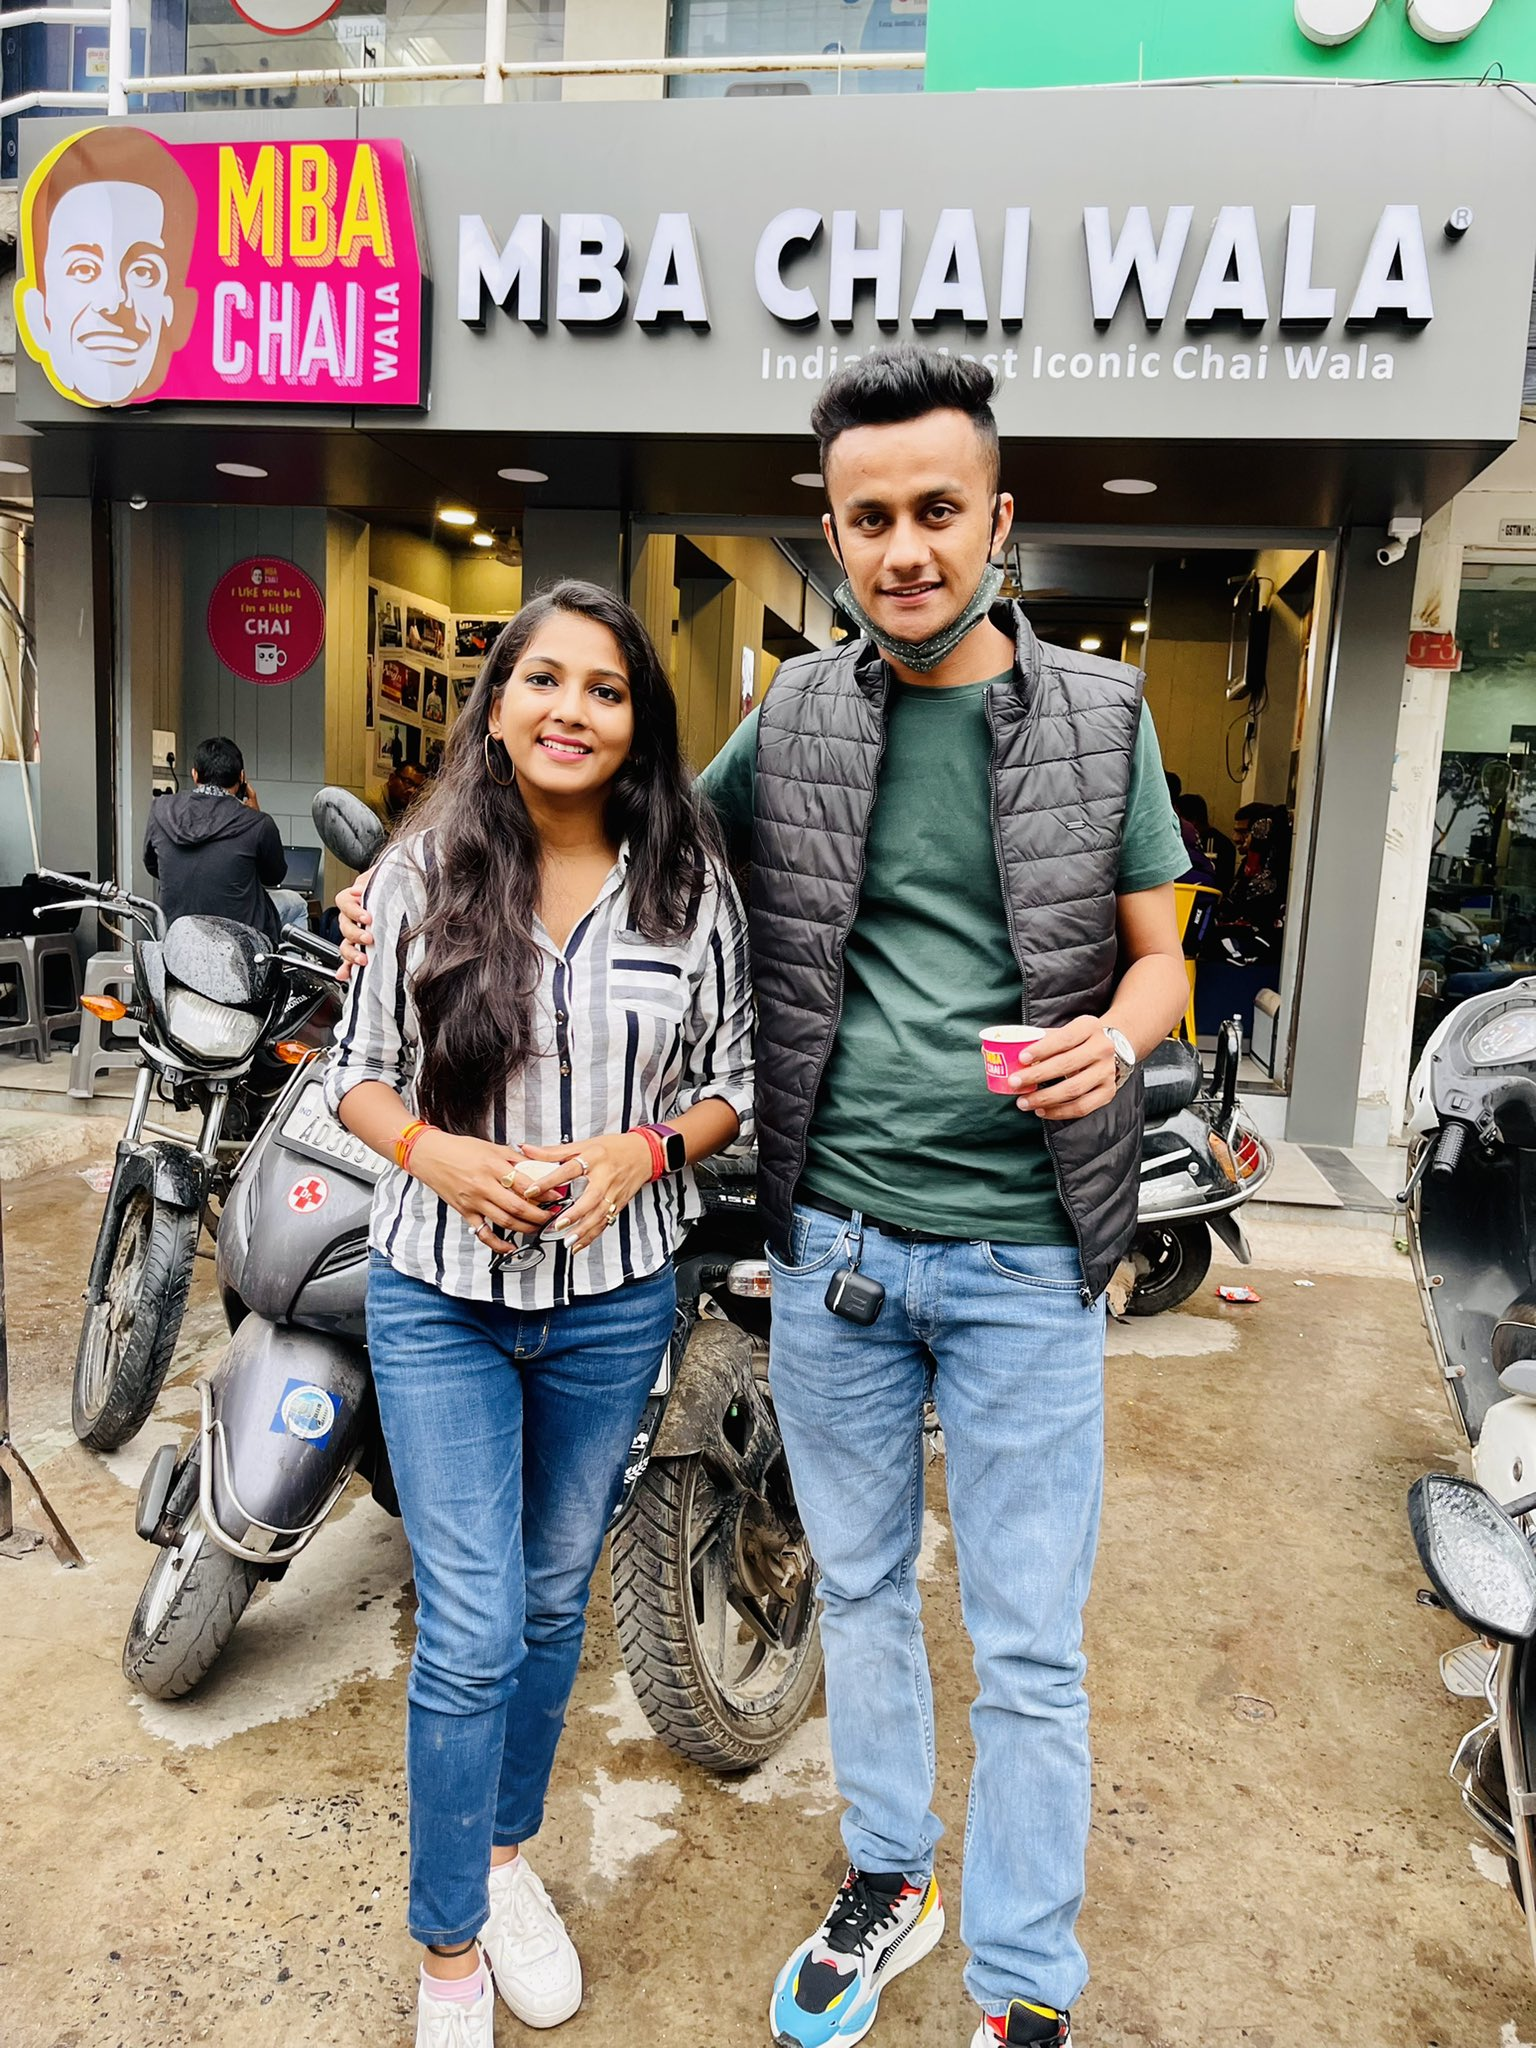 Praful Billor of the famous Tea Cafe Franchisee MBA Chaiwala